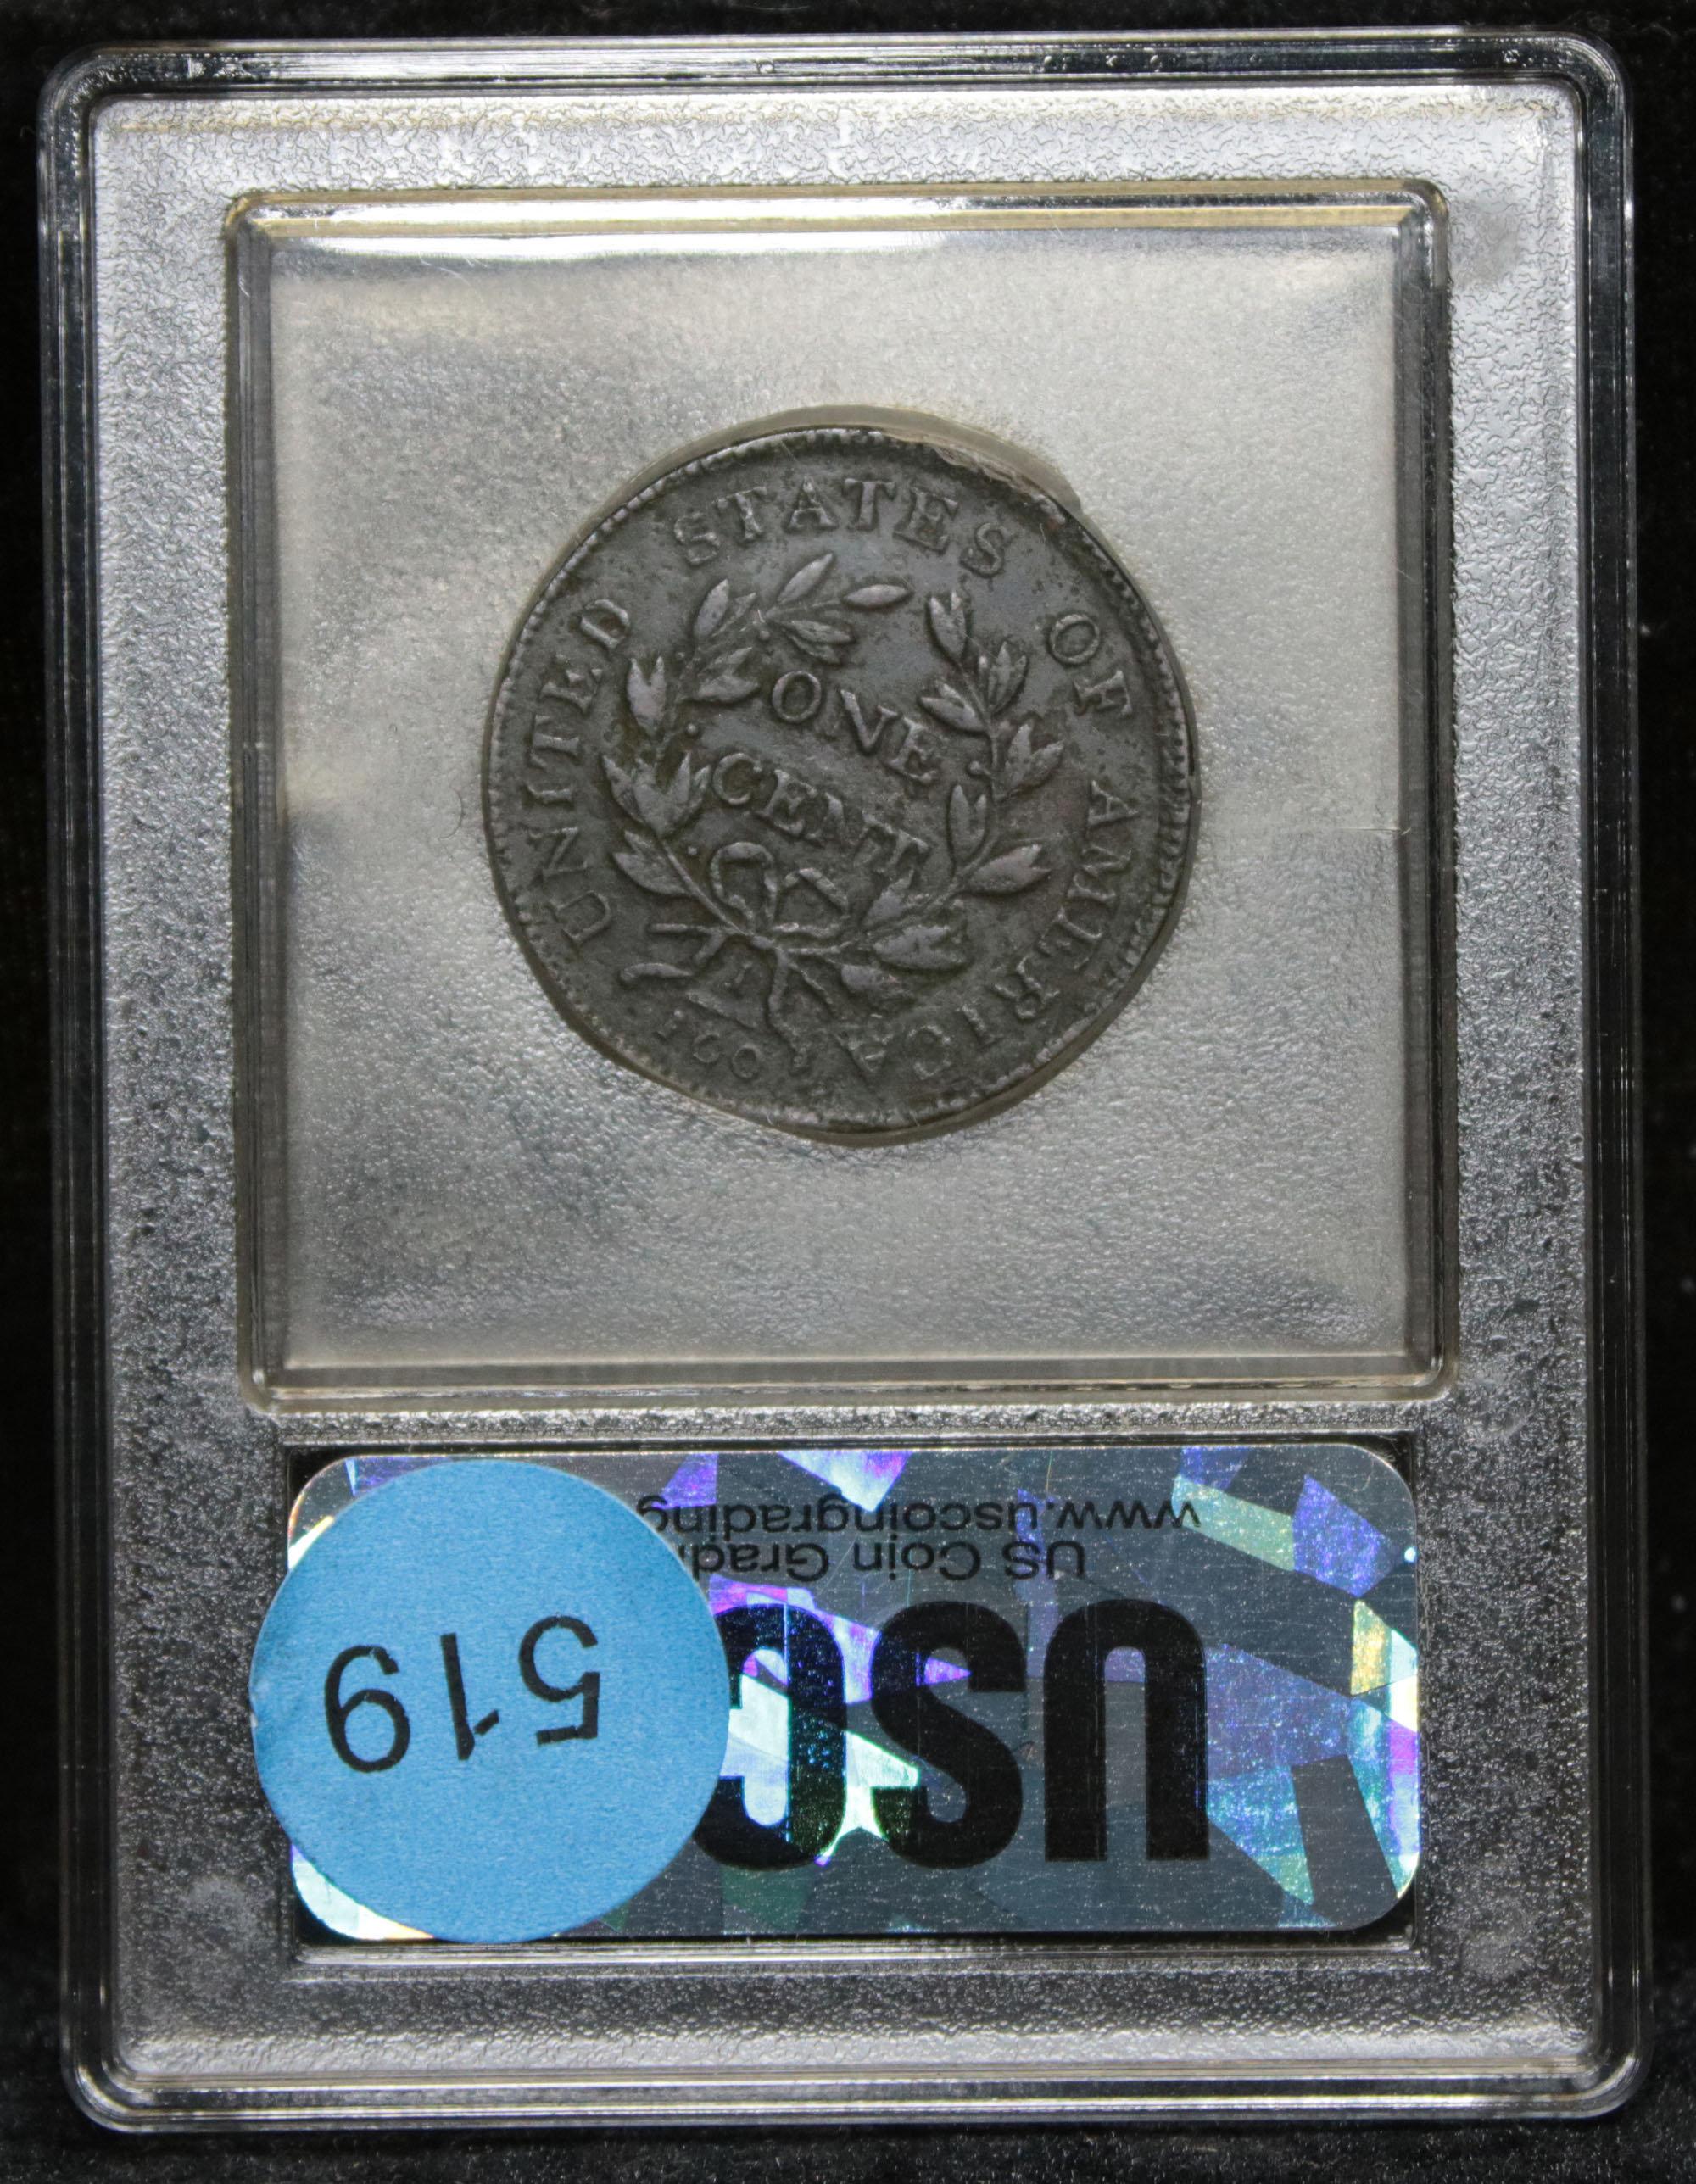 ***Auction Highlight*** 1802 Draped Bust Large Cent 1c Graded xf by USCG (fc)